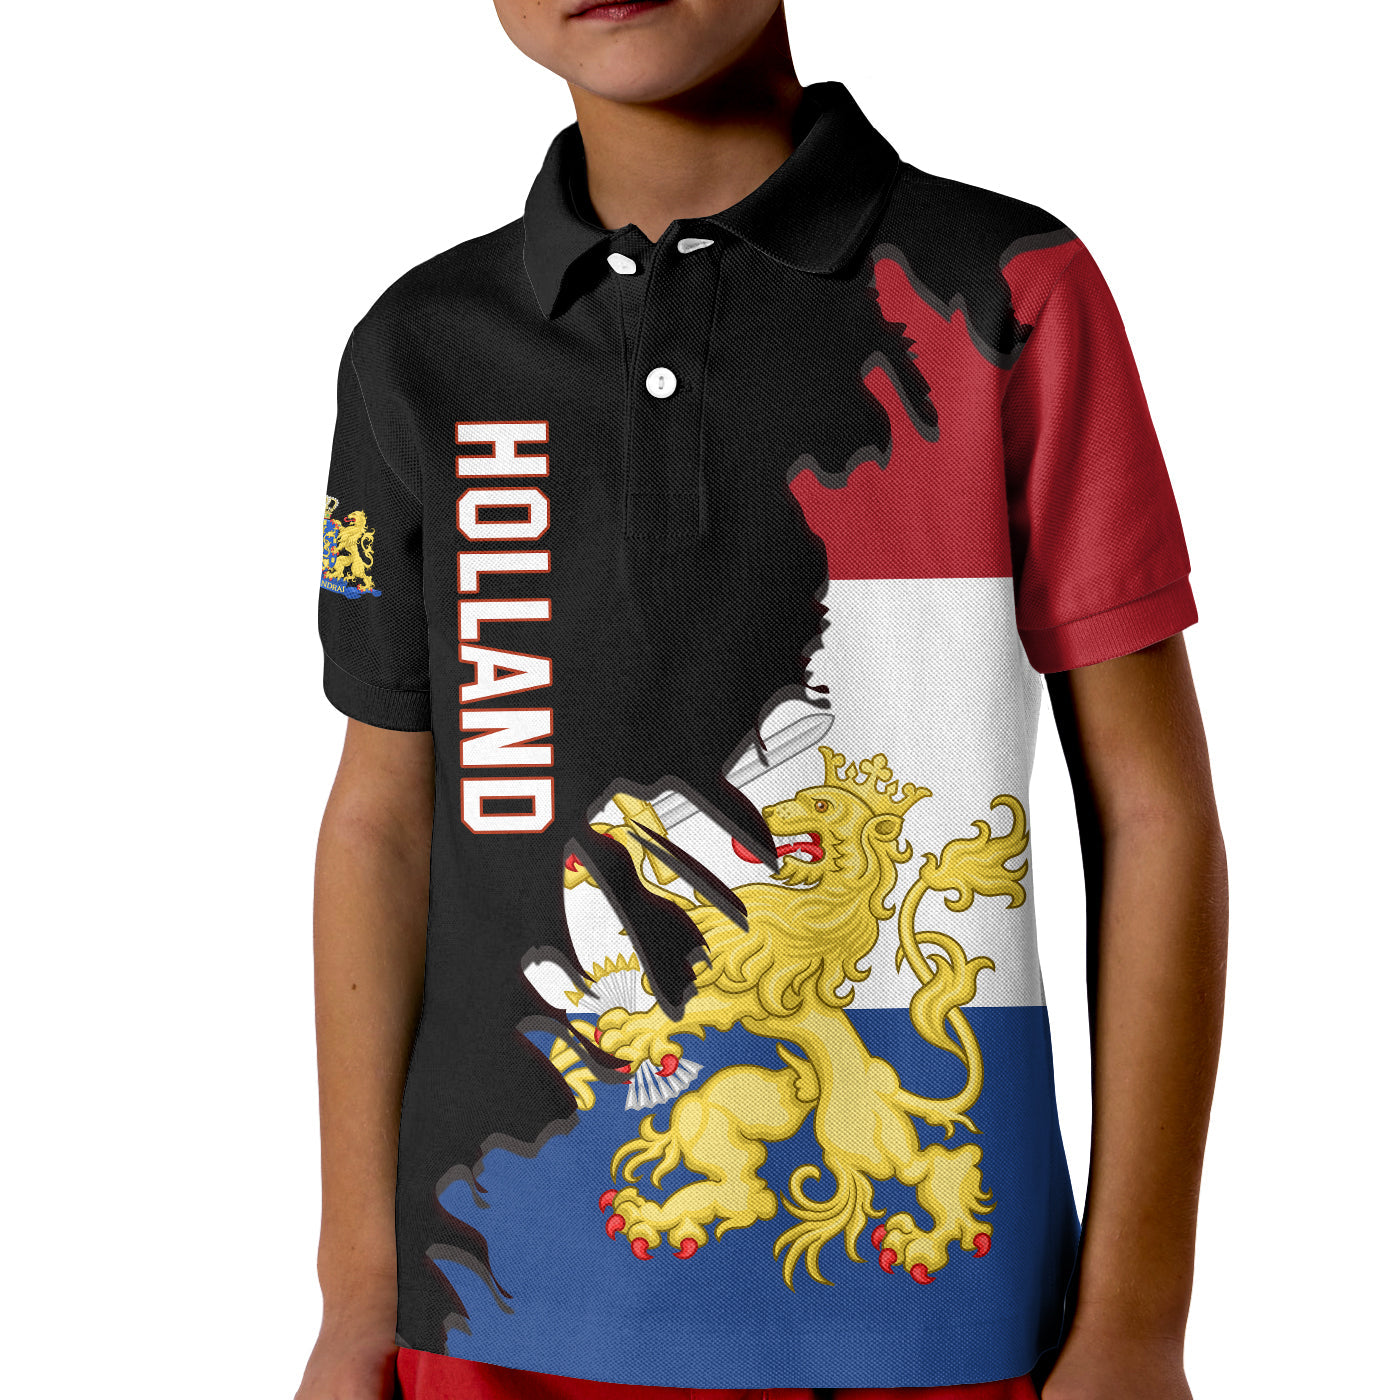 netherlands-polo-shirt-kid-style-flag-and-map-holland